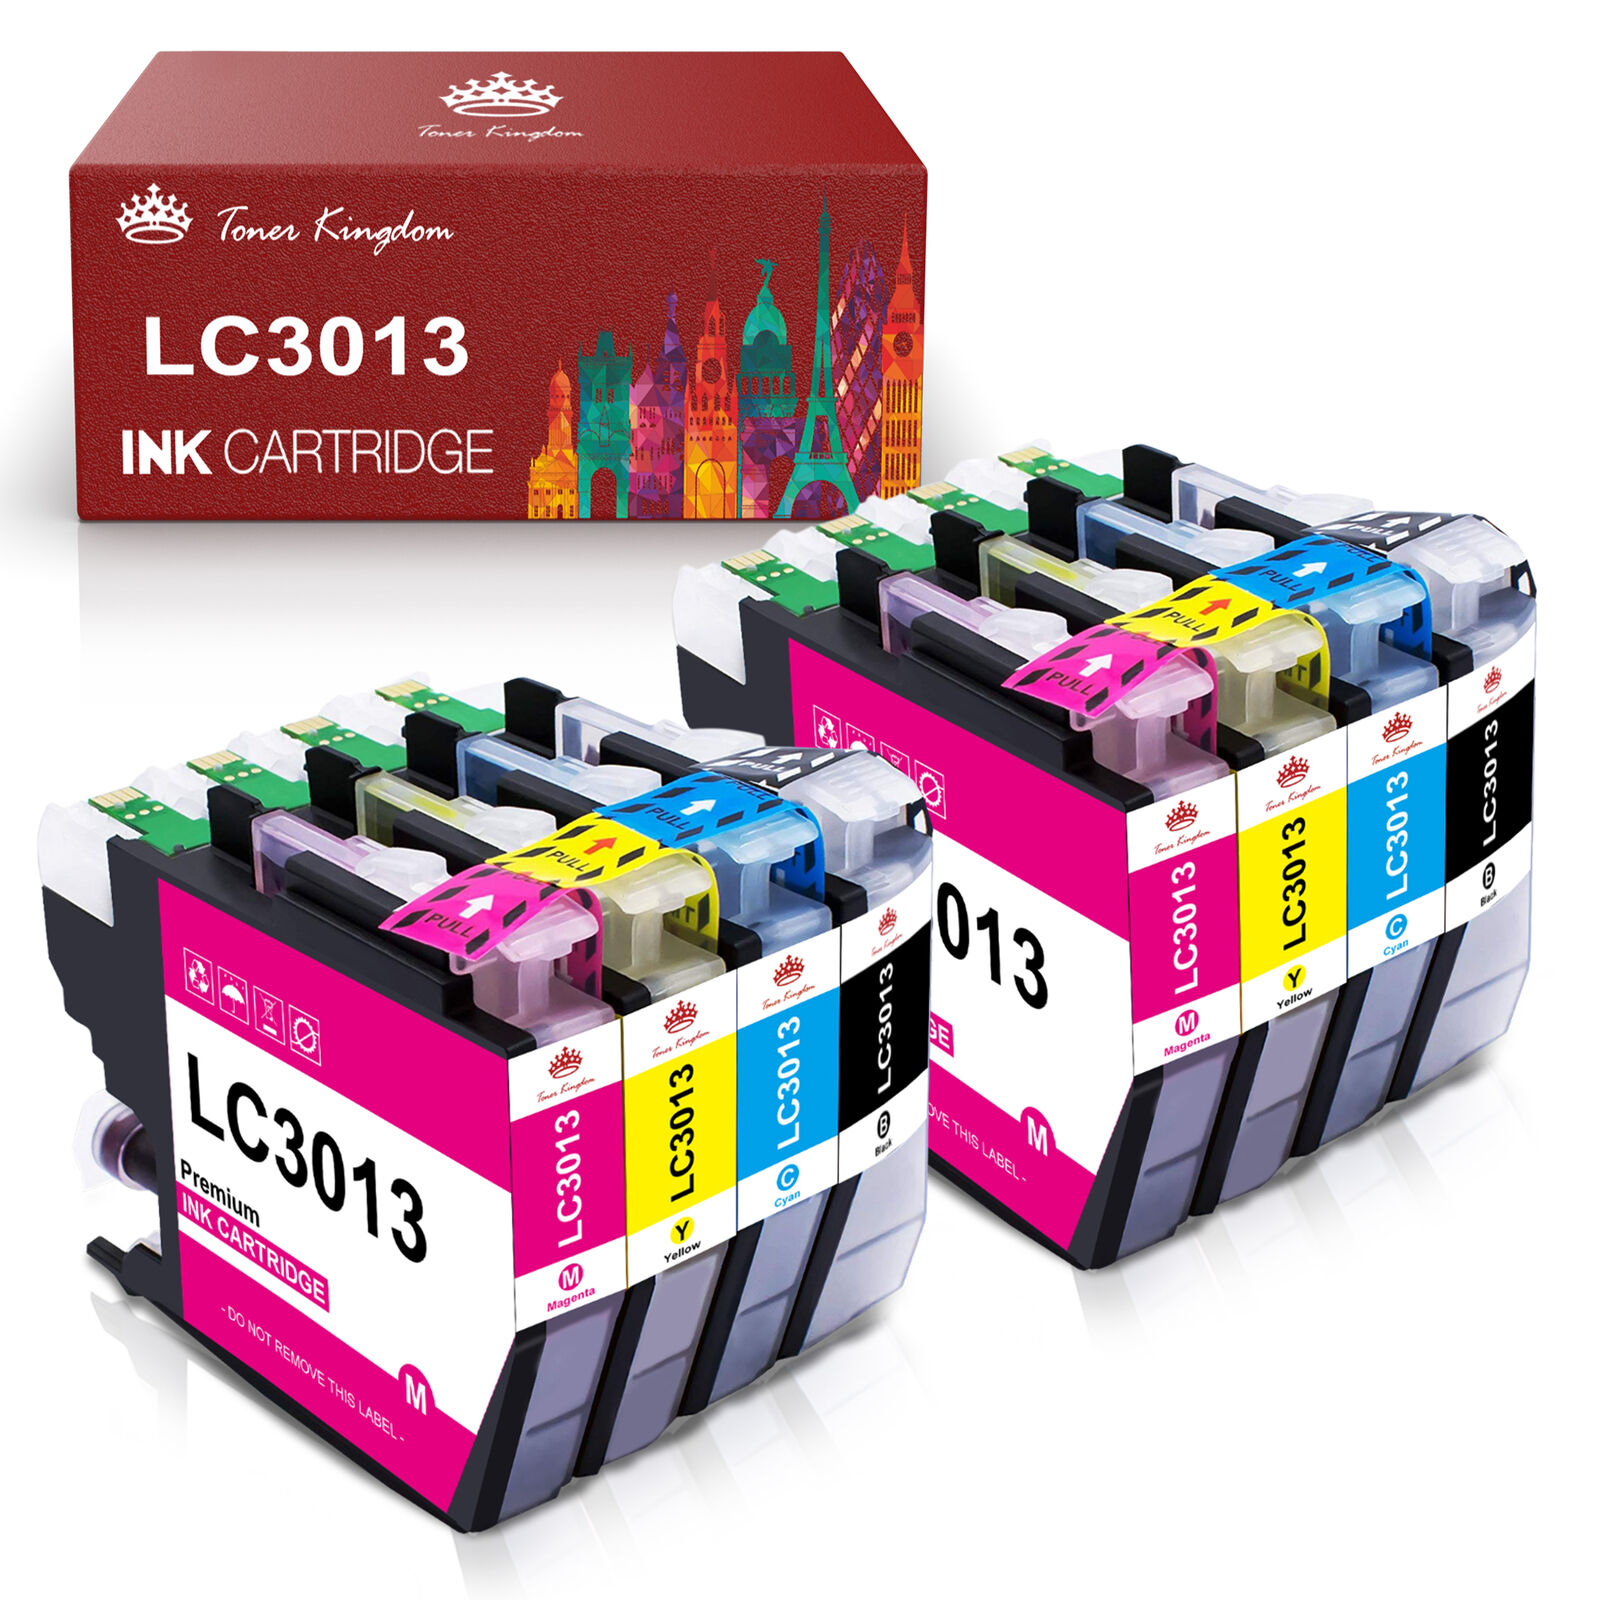 8x Ink compatible for Brother LC3013 LC3011 MFC-J690DW J491DW MFC-J895DW Printer